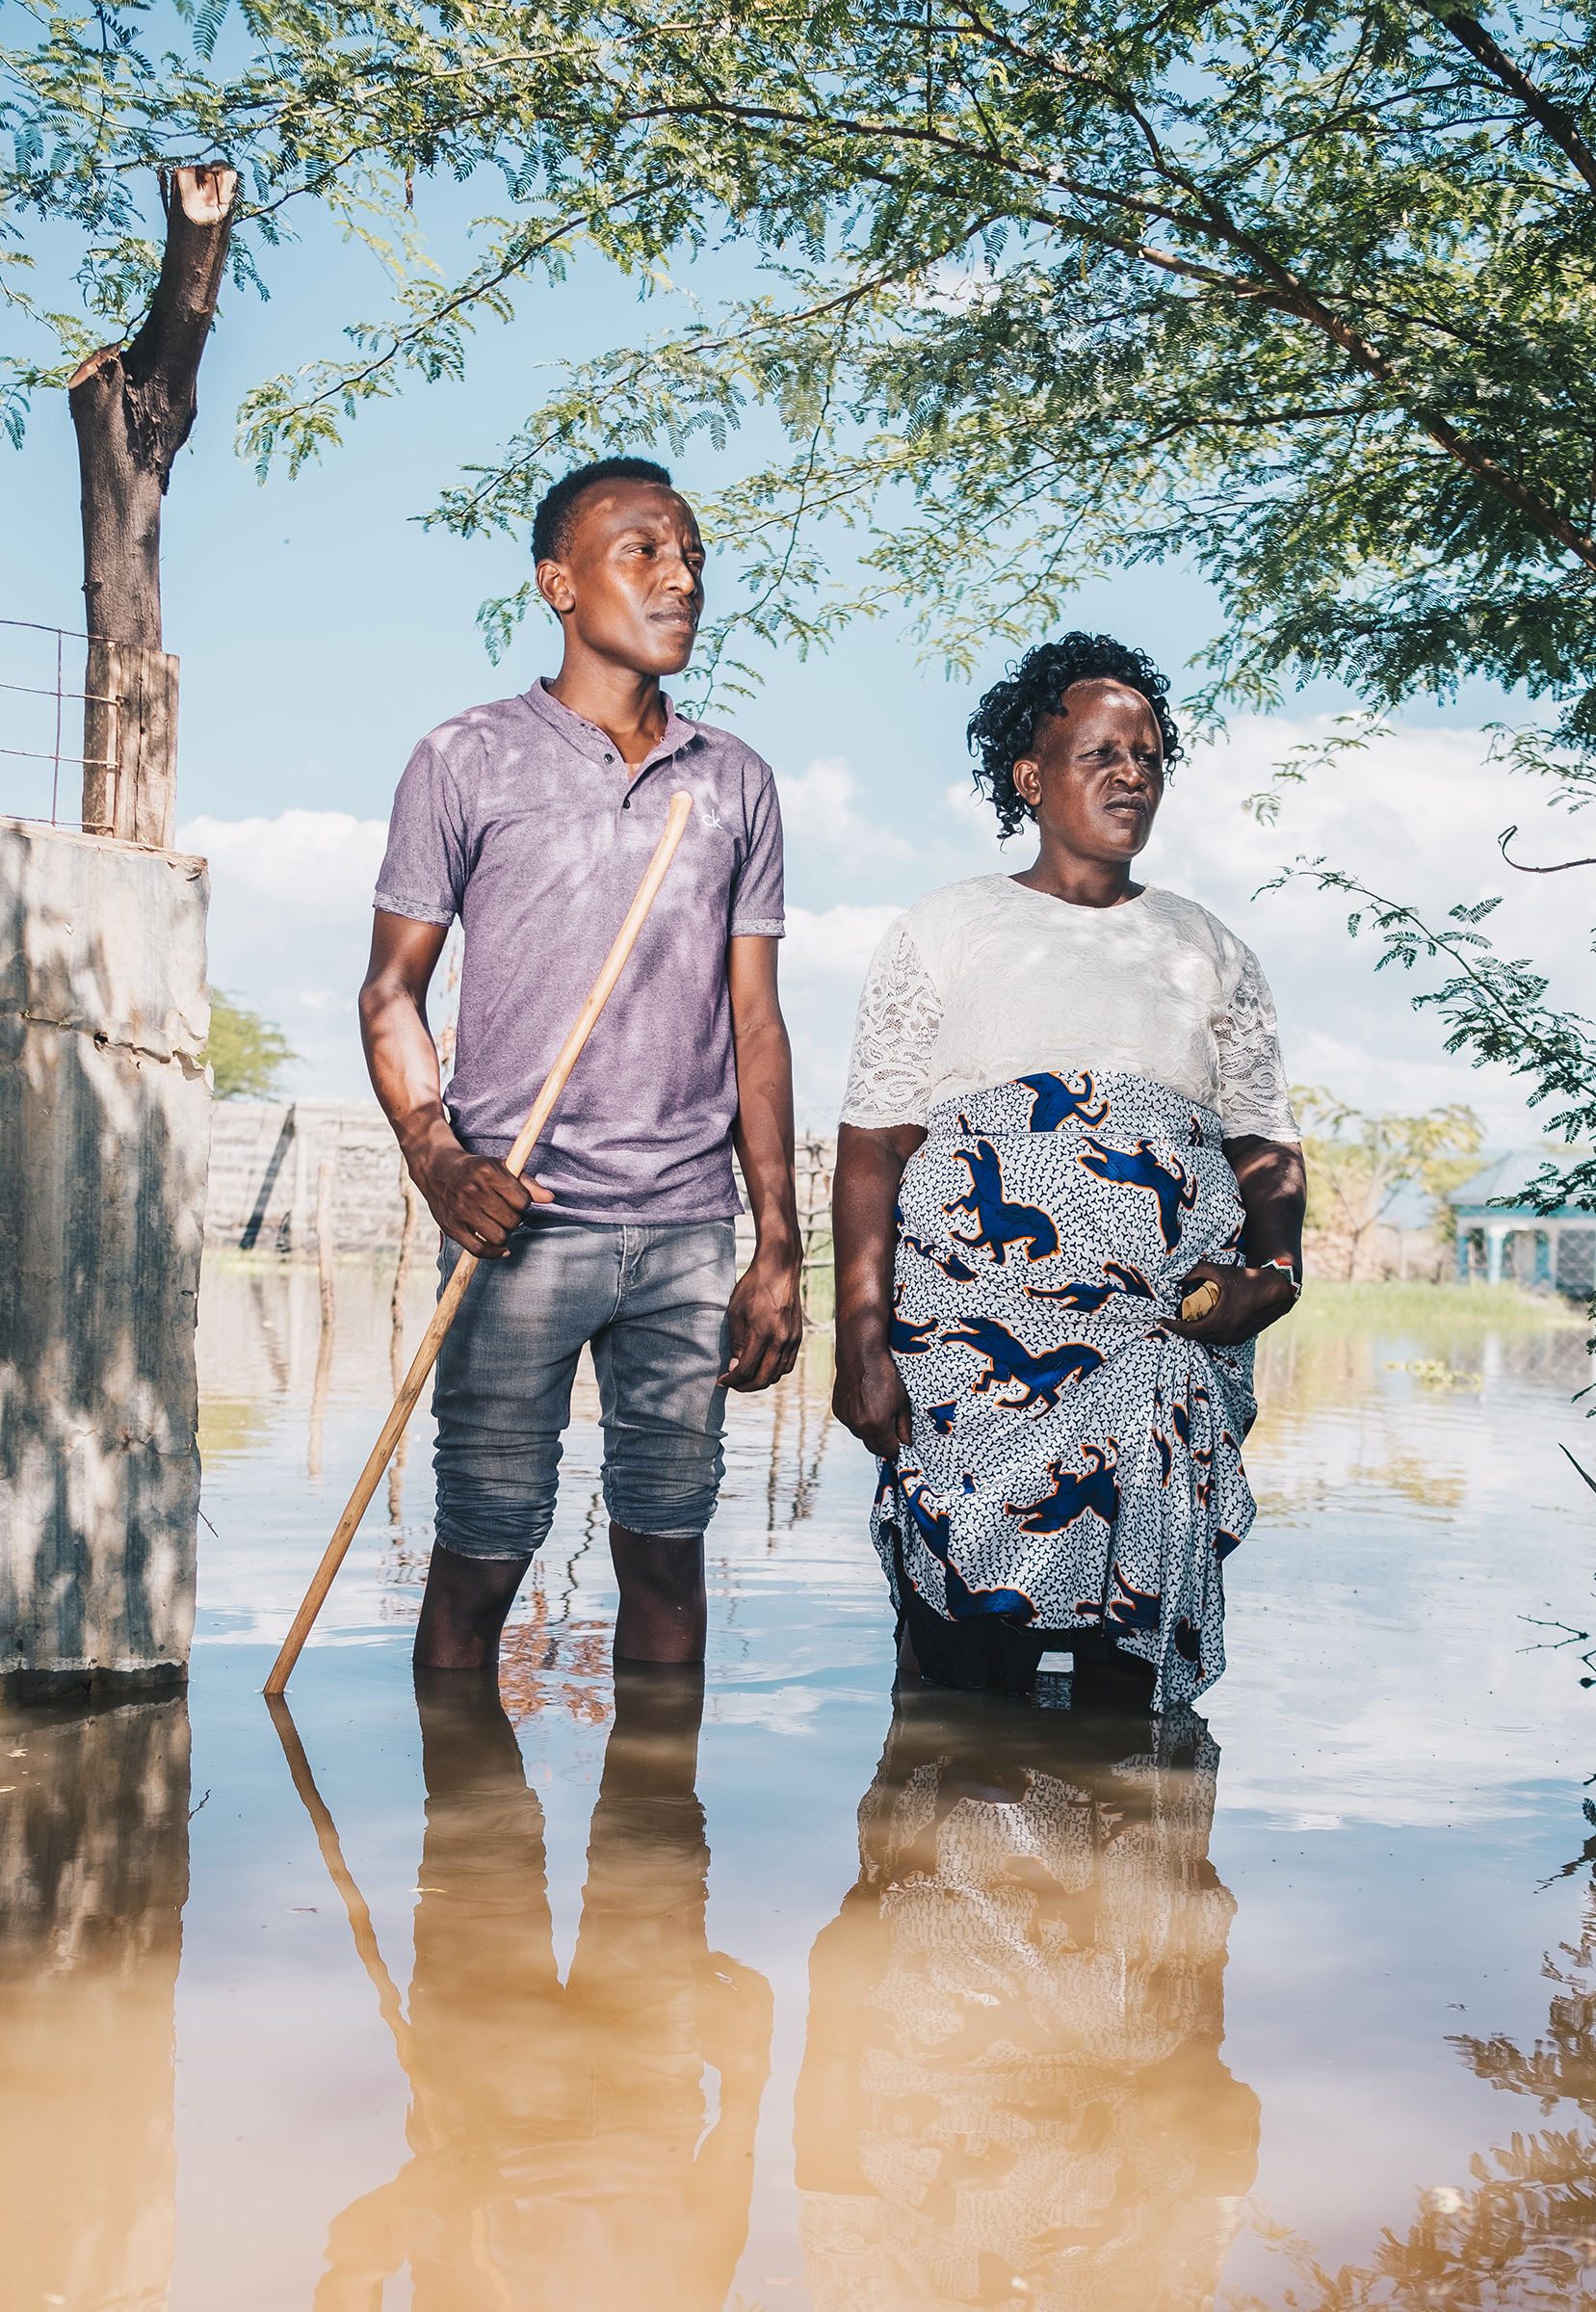 <strong>Festus and Veronica Parkolwa</strong> stand at the entrance of their former home by Lake Baringo. "<a href="https://time.com/5953402/climate-migrants-kenya-floods/">Environmental Crises Are Forcing Millions Into Cities. Can Countries Turn Climate Migrants Into an Asset?</a>" April 26 issue. (Khadija Farah for TIME)